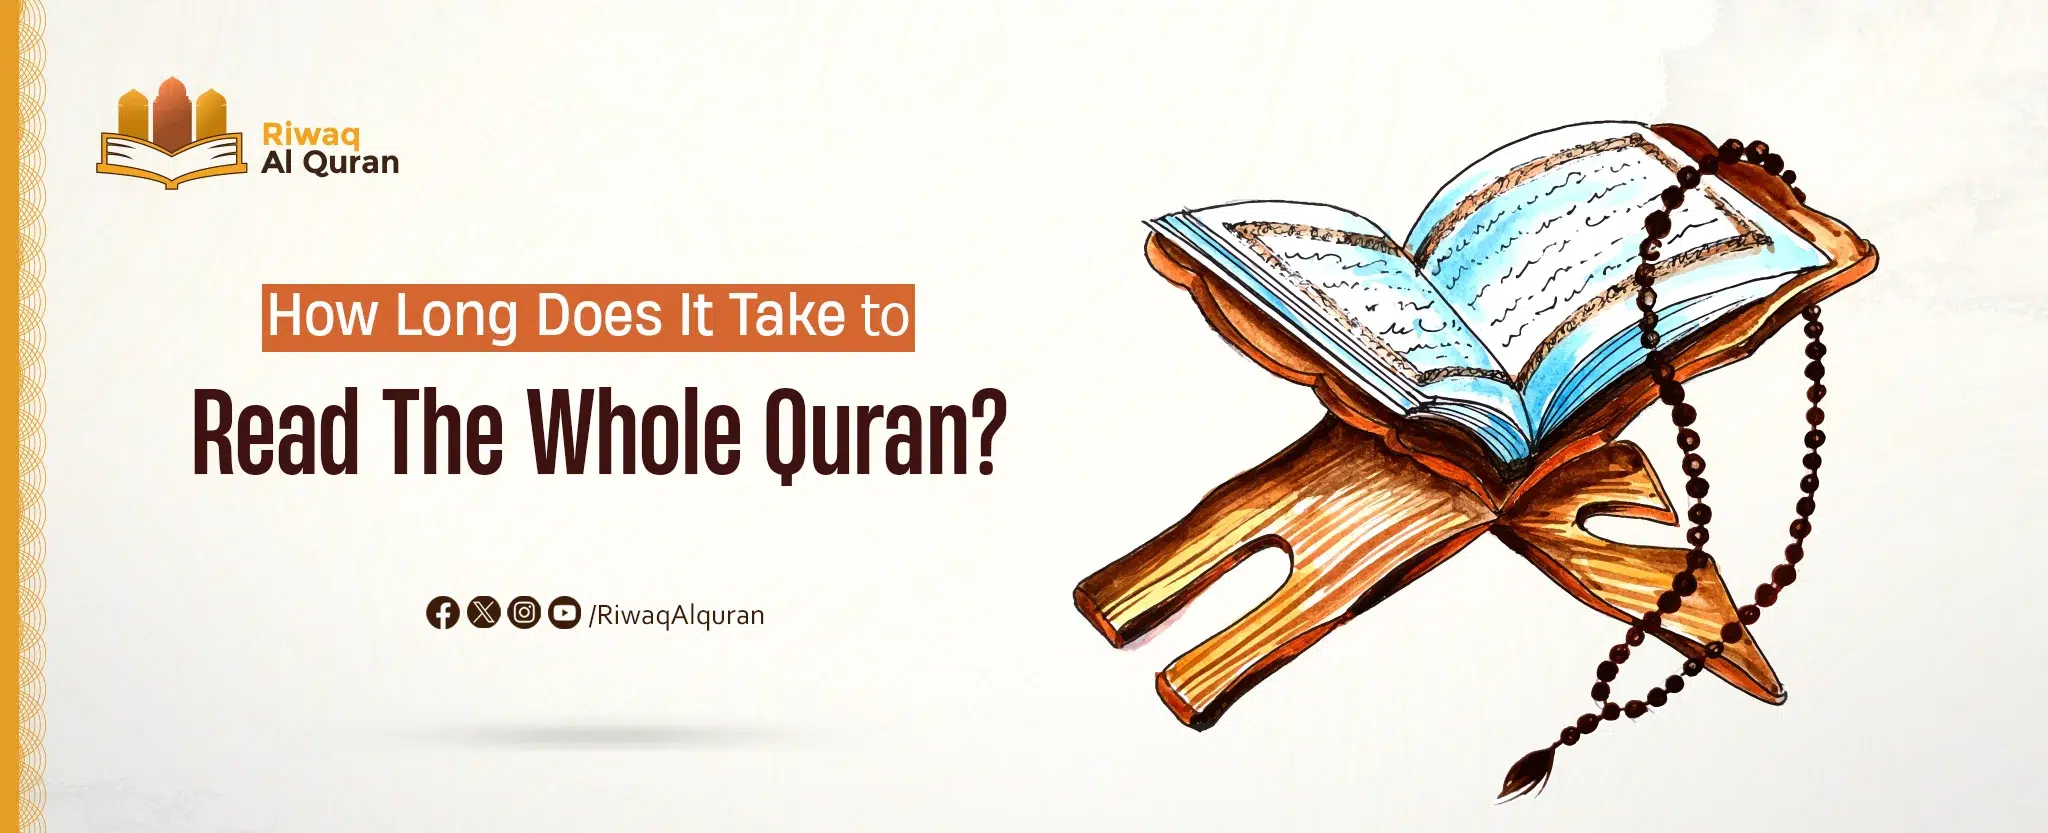 How Long Does It Take To Read The Whole Quran?